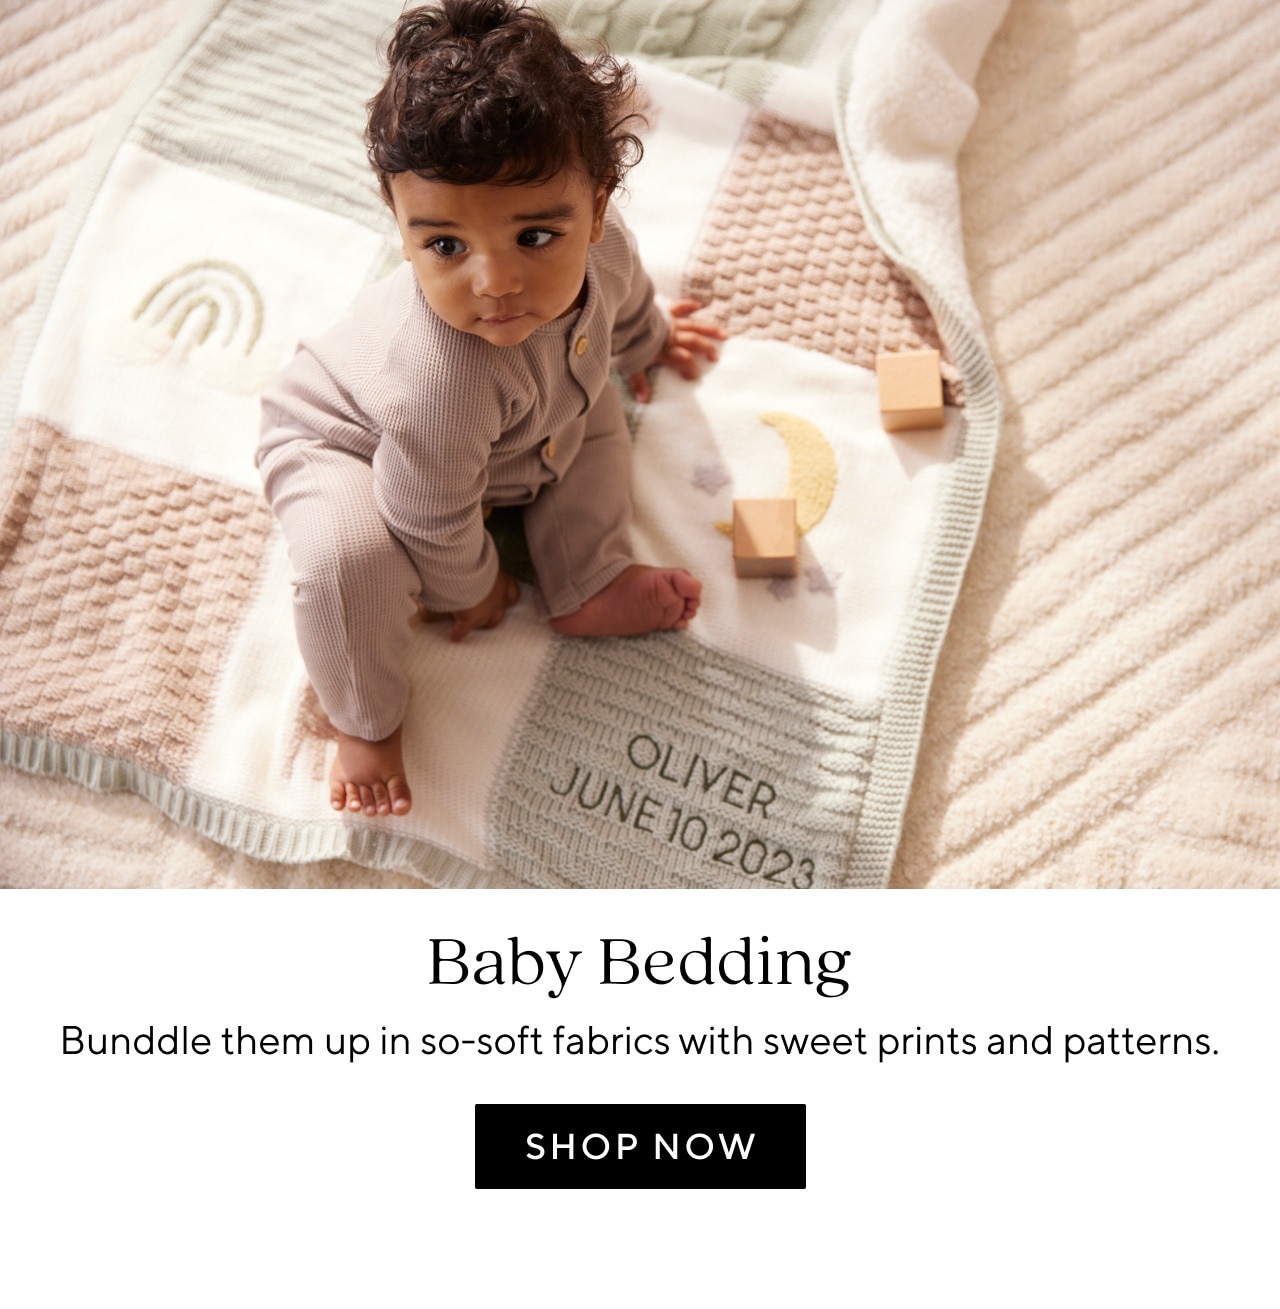 BABY BEDDING - SHOP NOW